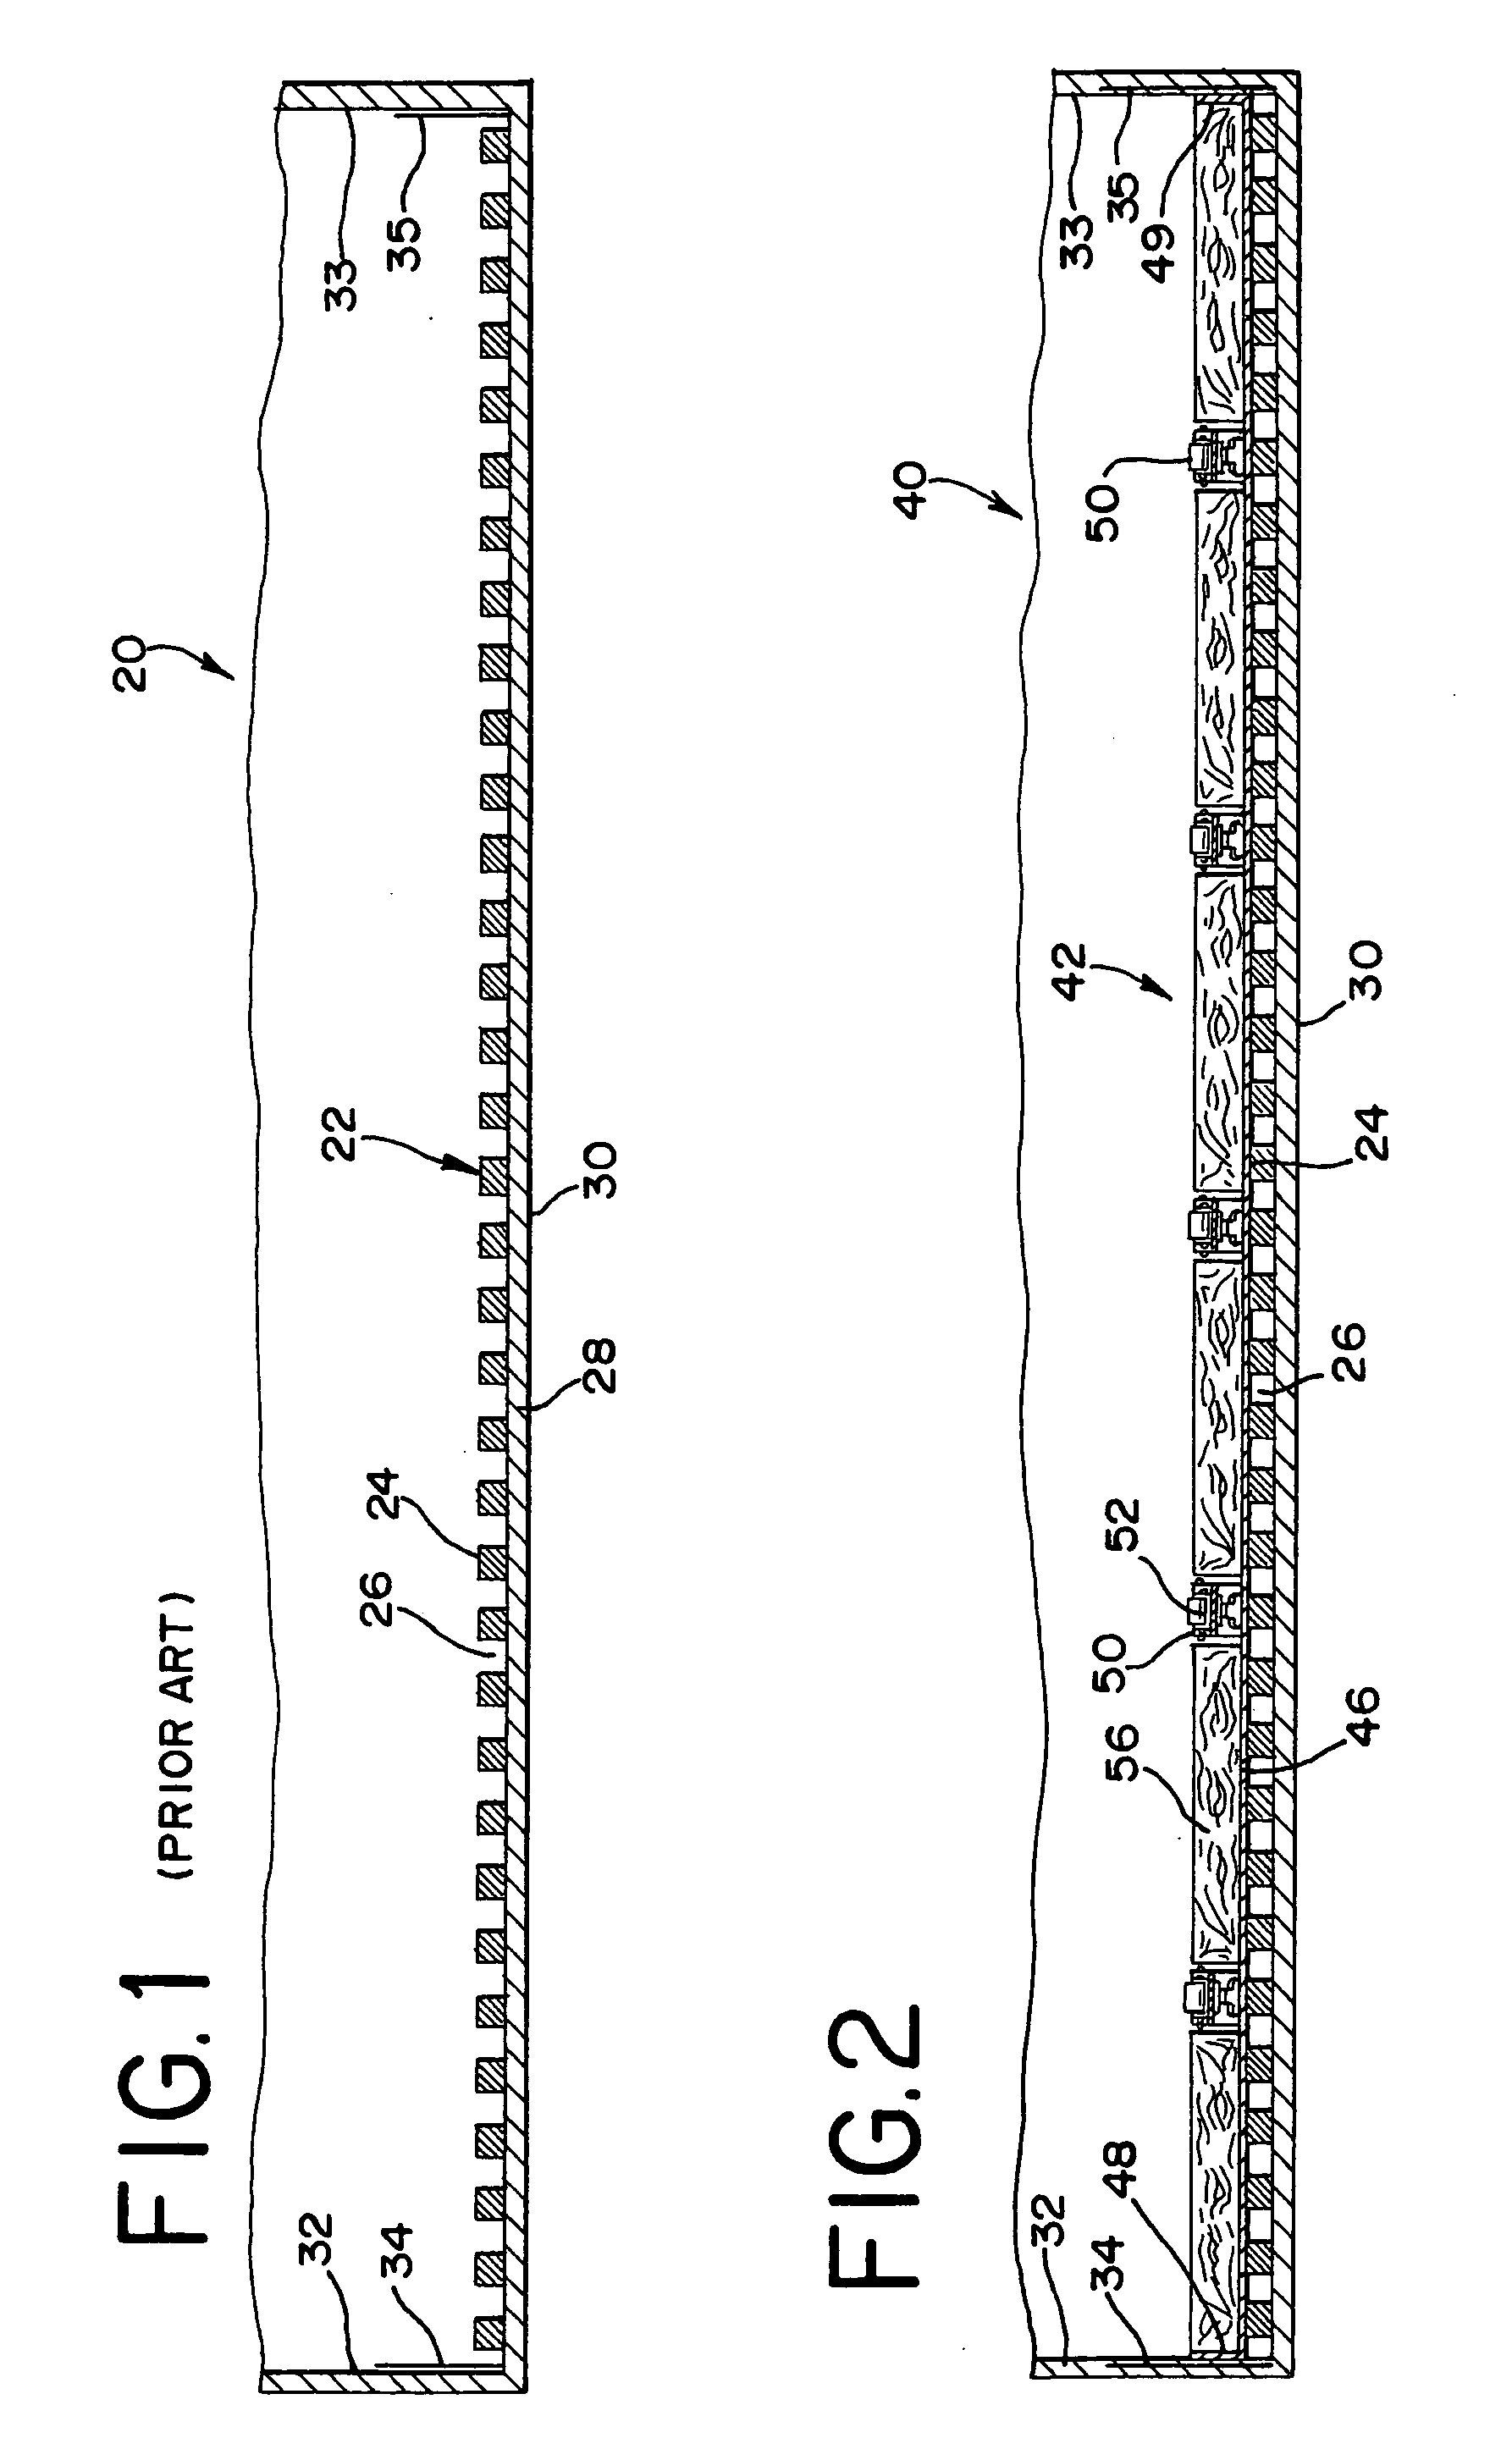 Loading, unloading and refrigeration apparatus for refrigerated trailers